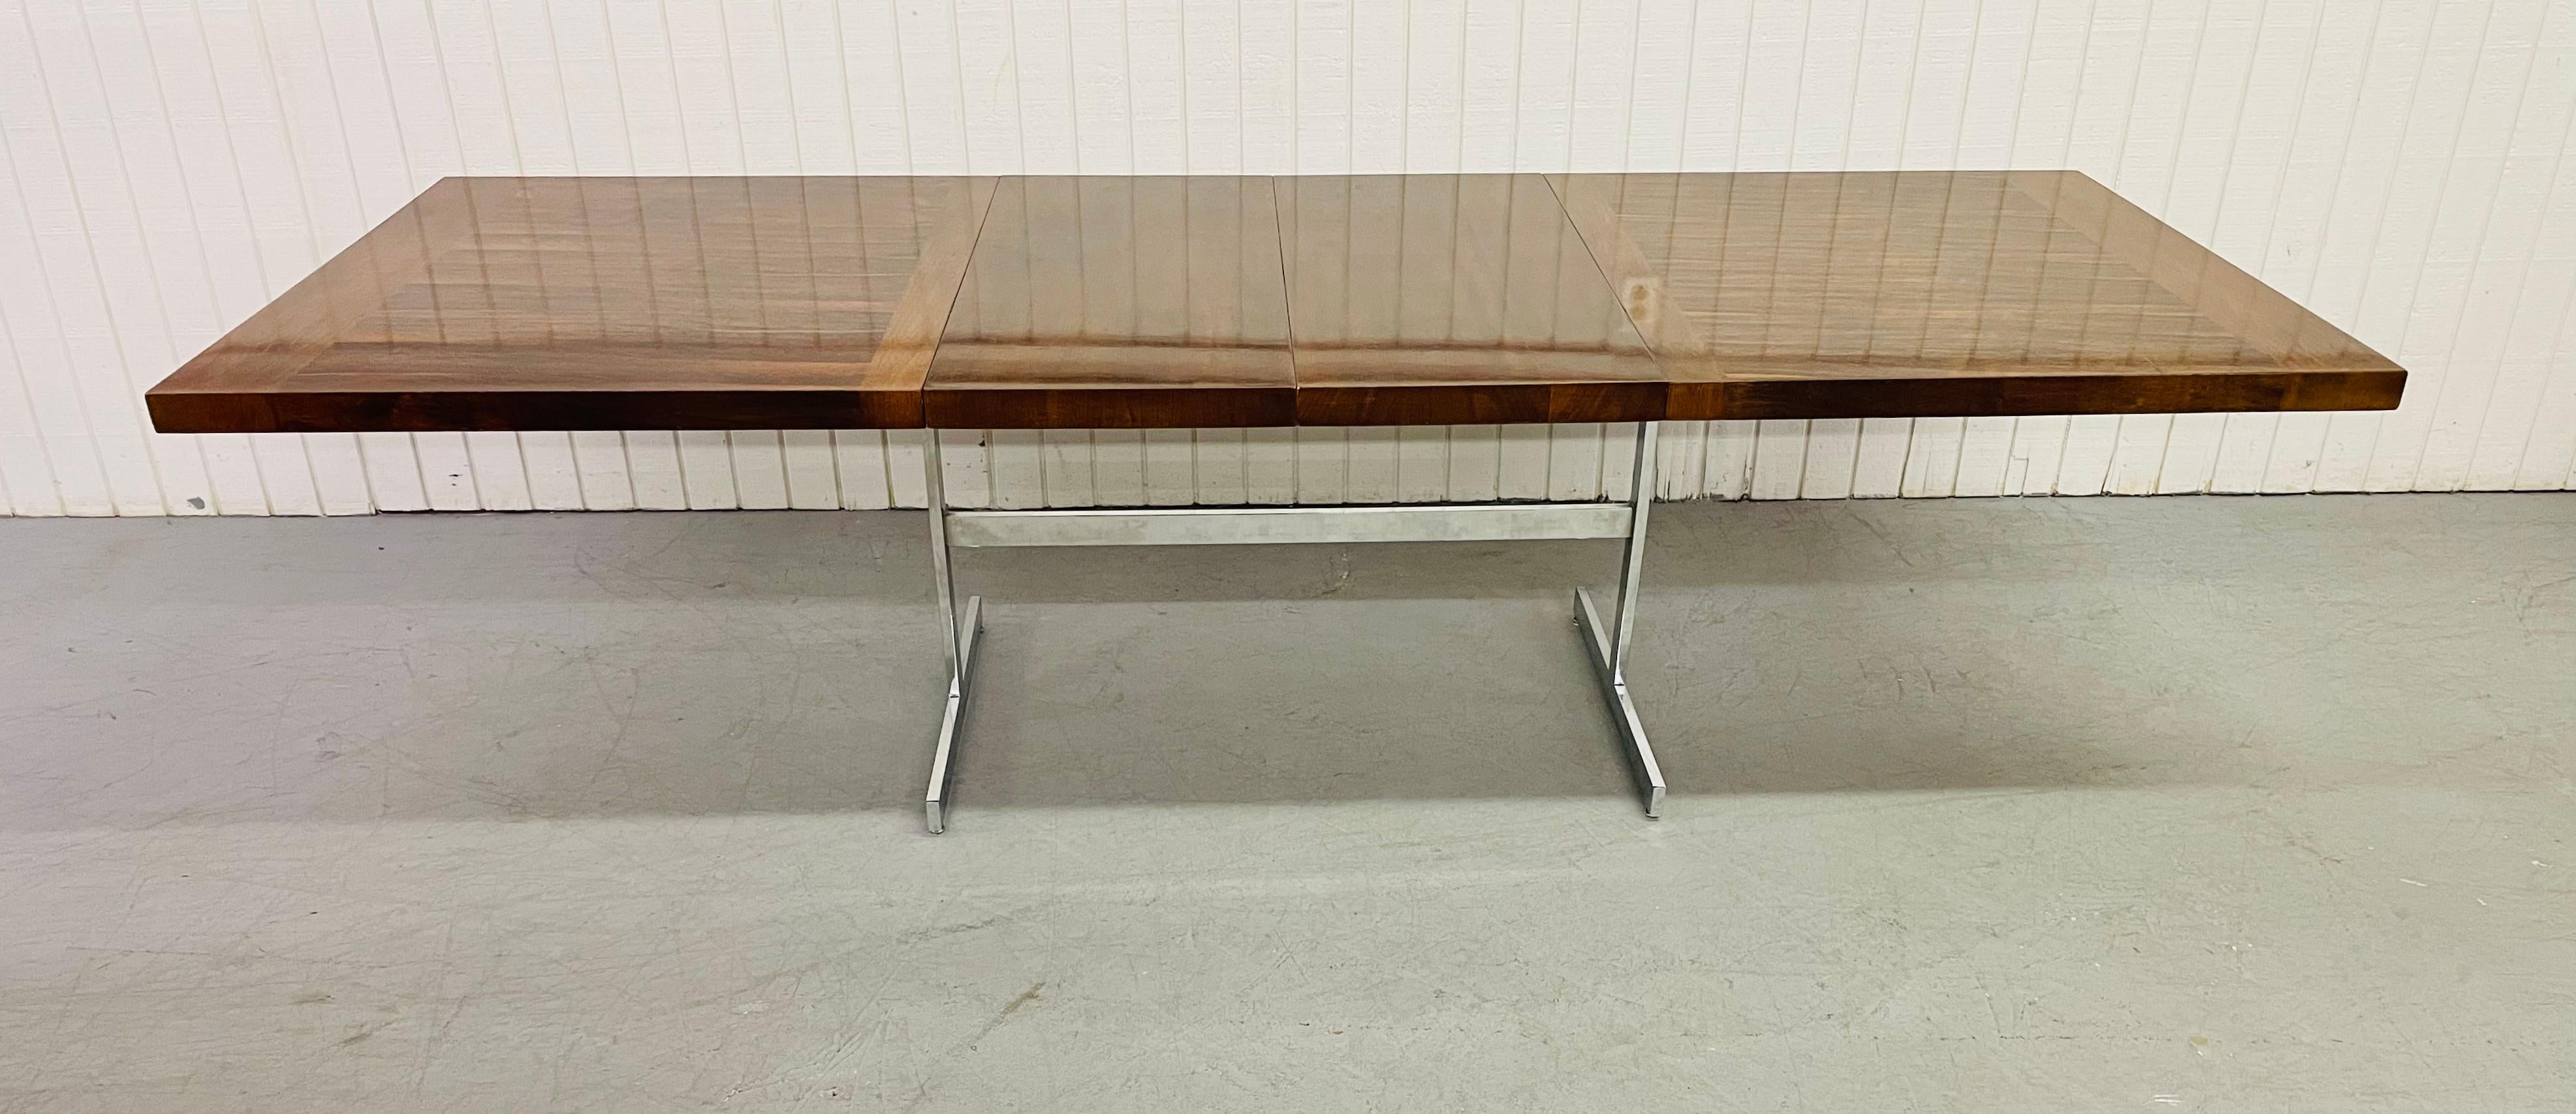 This listing is for a 1980’s Chromcraft rosewood dining table. Featuring a rectangular rosewood top, flat bar chrome base, and two leaves to extend the table up to 108” L!